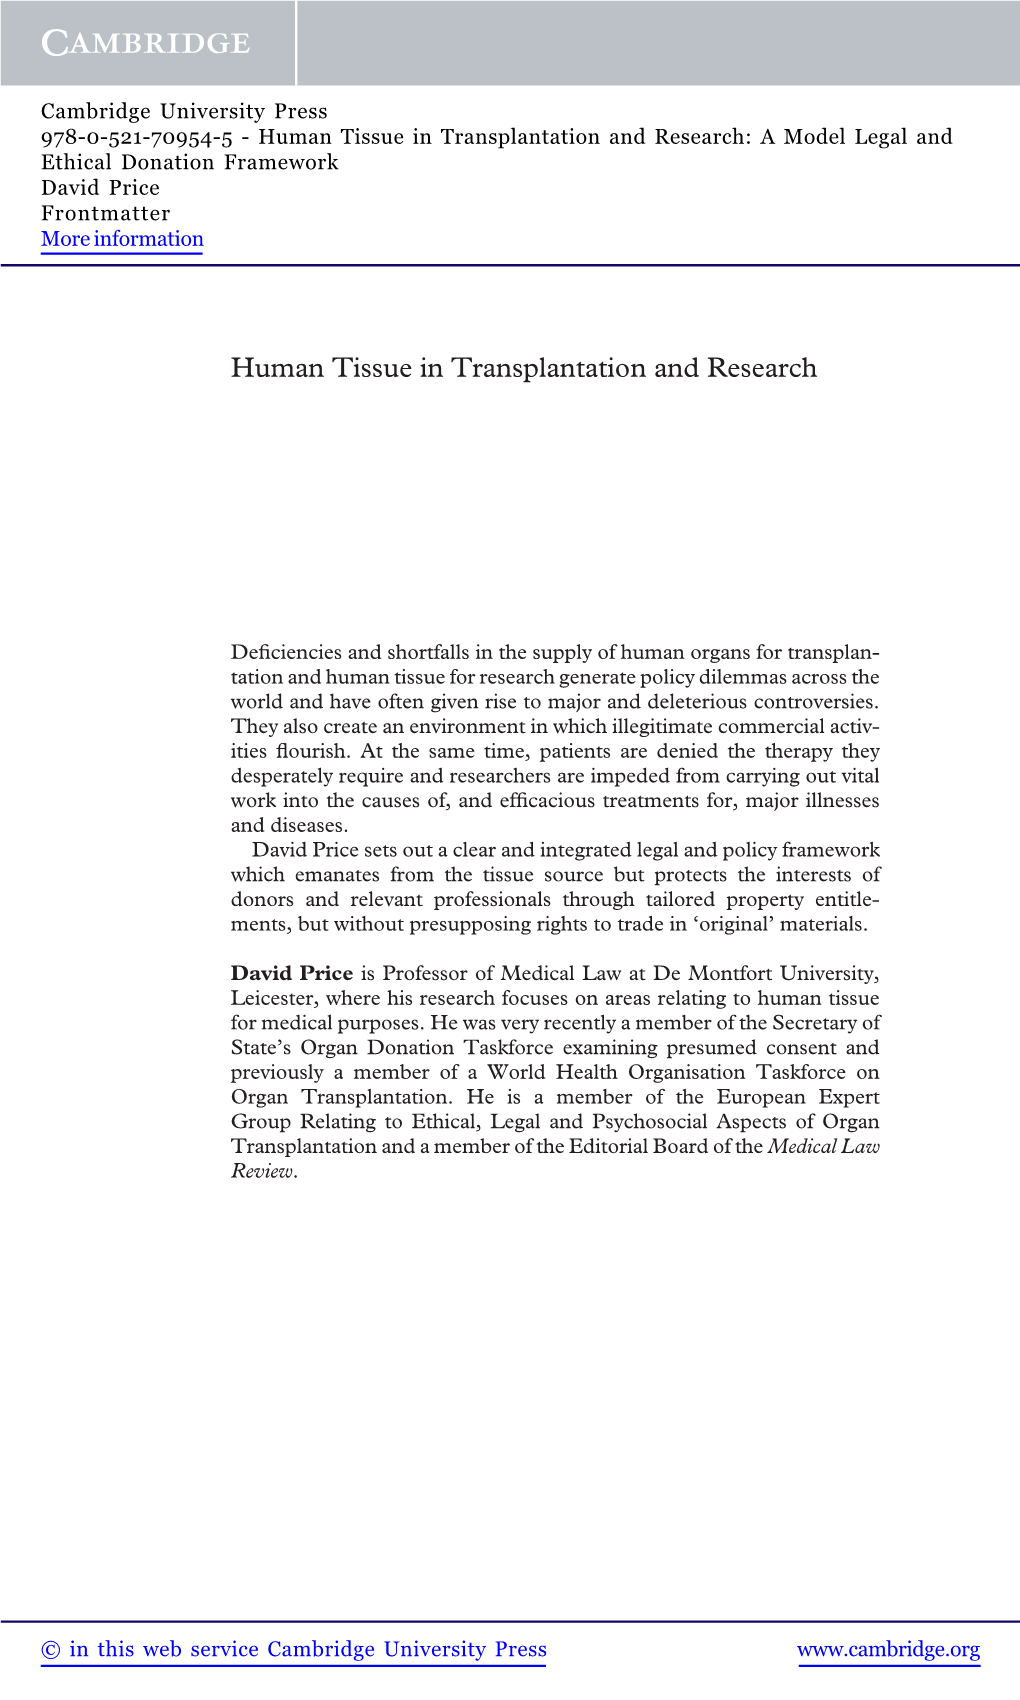 Human Tissue in Transplantation and Research: a Model Legal and Ethical Donation Framework David Price Frontmatter More Information